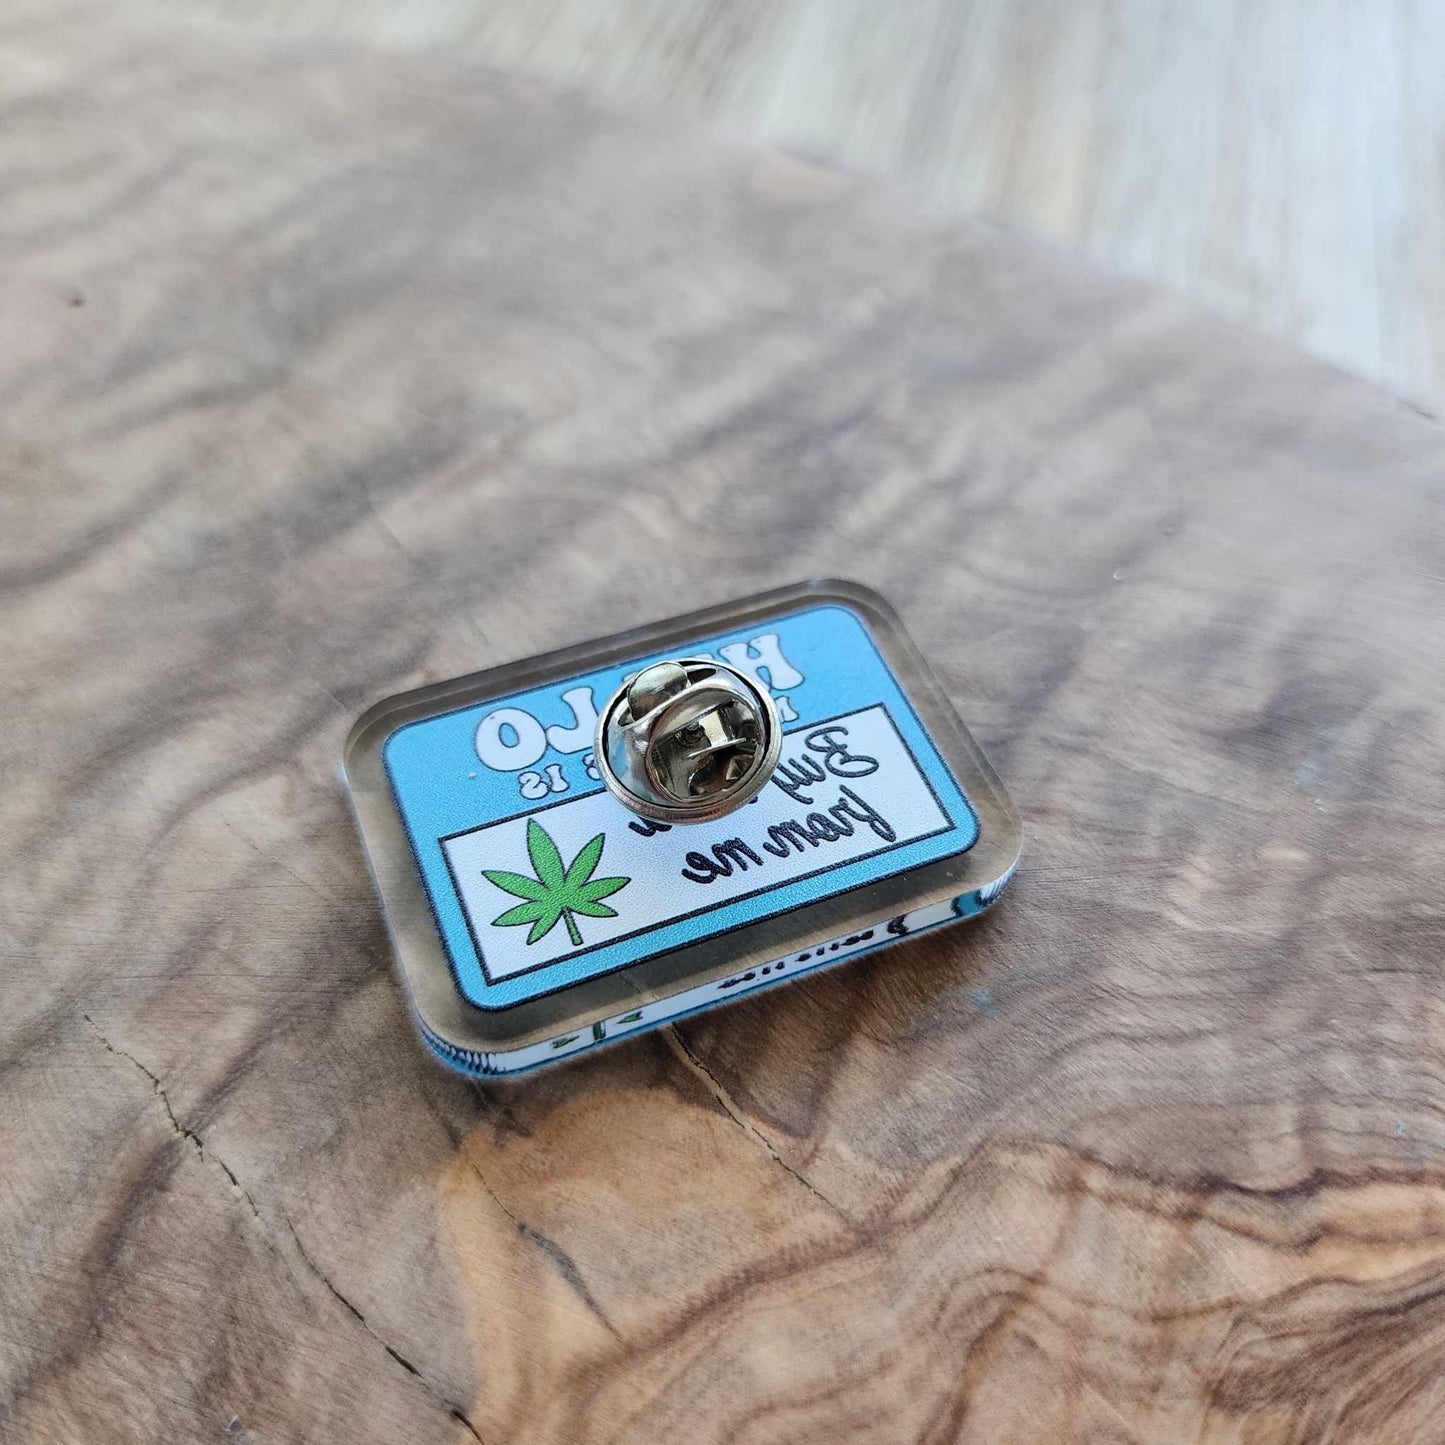 Hello my name is - Buy weed from me Acrylic Pin